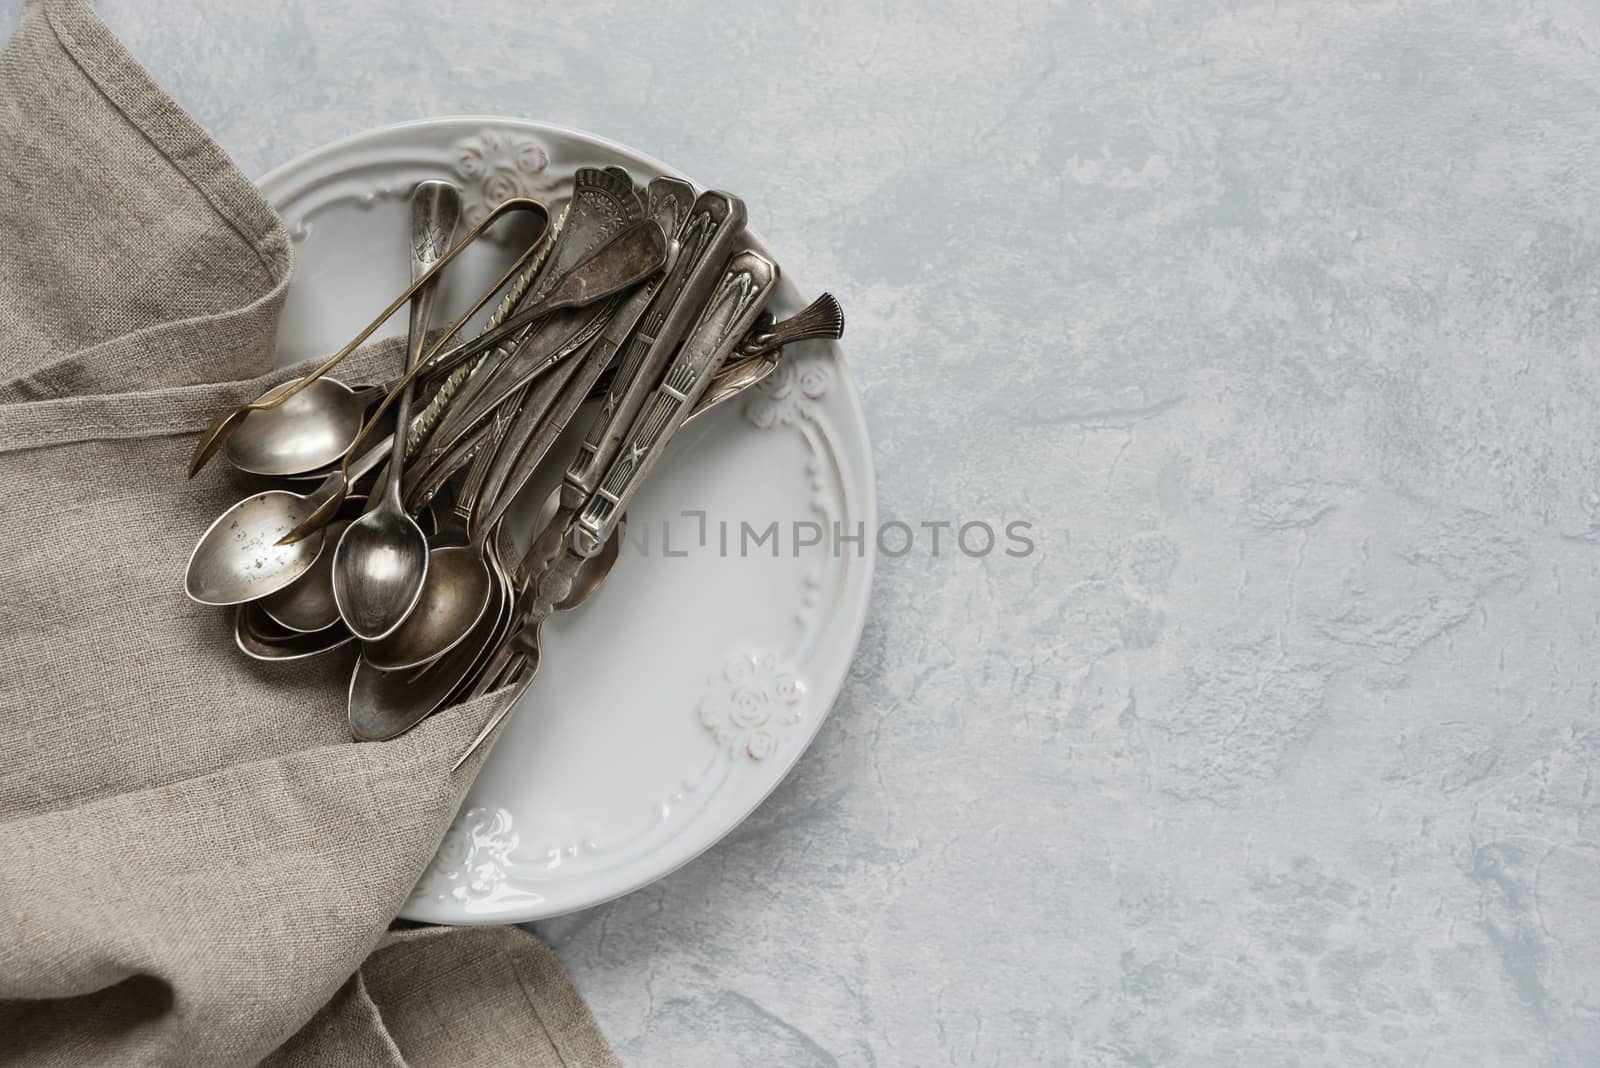 Various silverware on a ceramic plate on the background of gray concrete surface, with copy-space